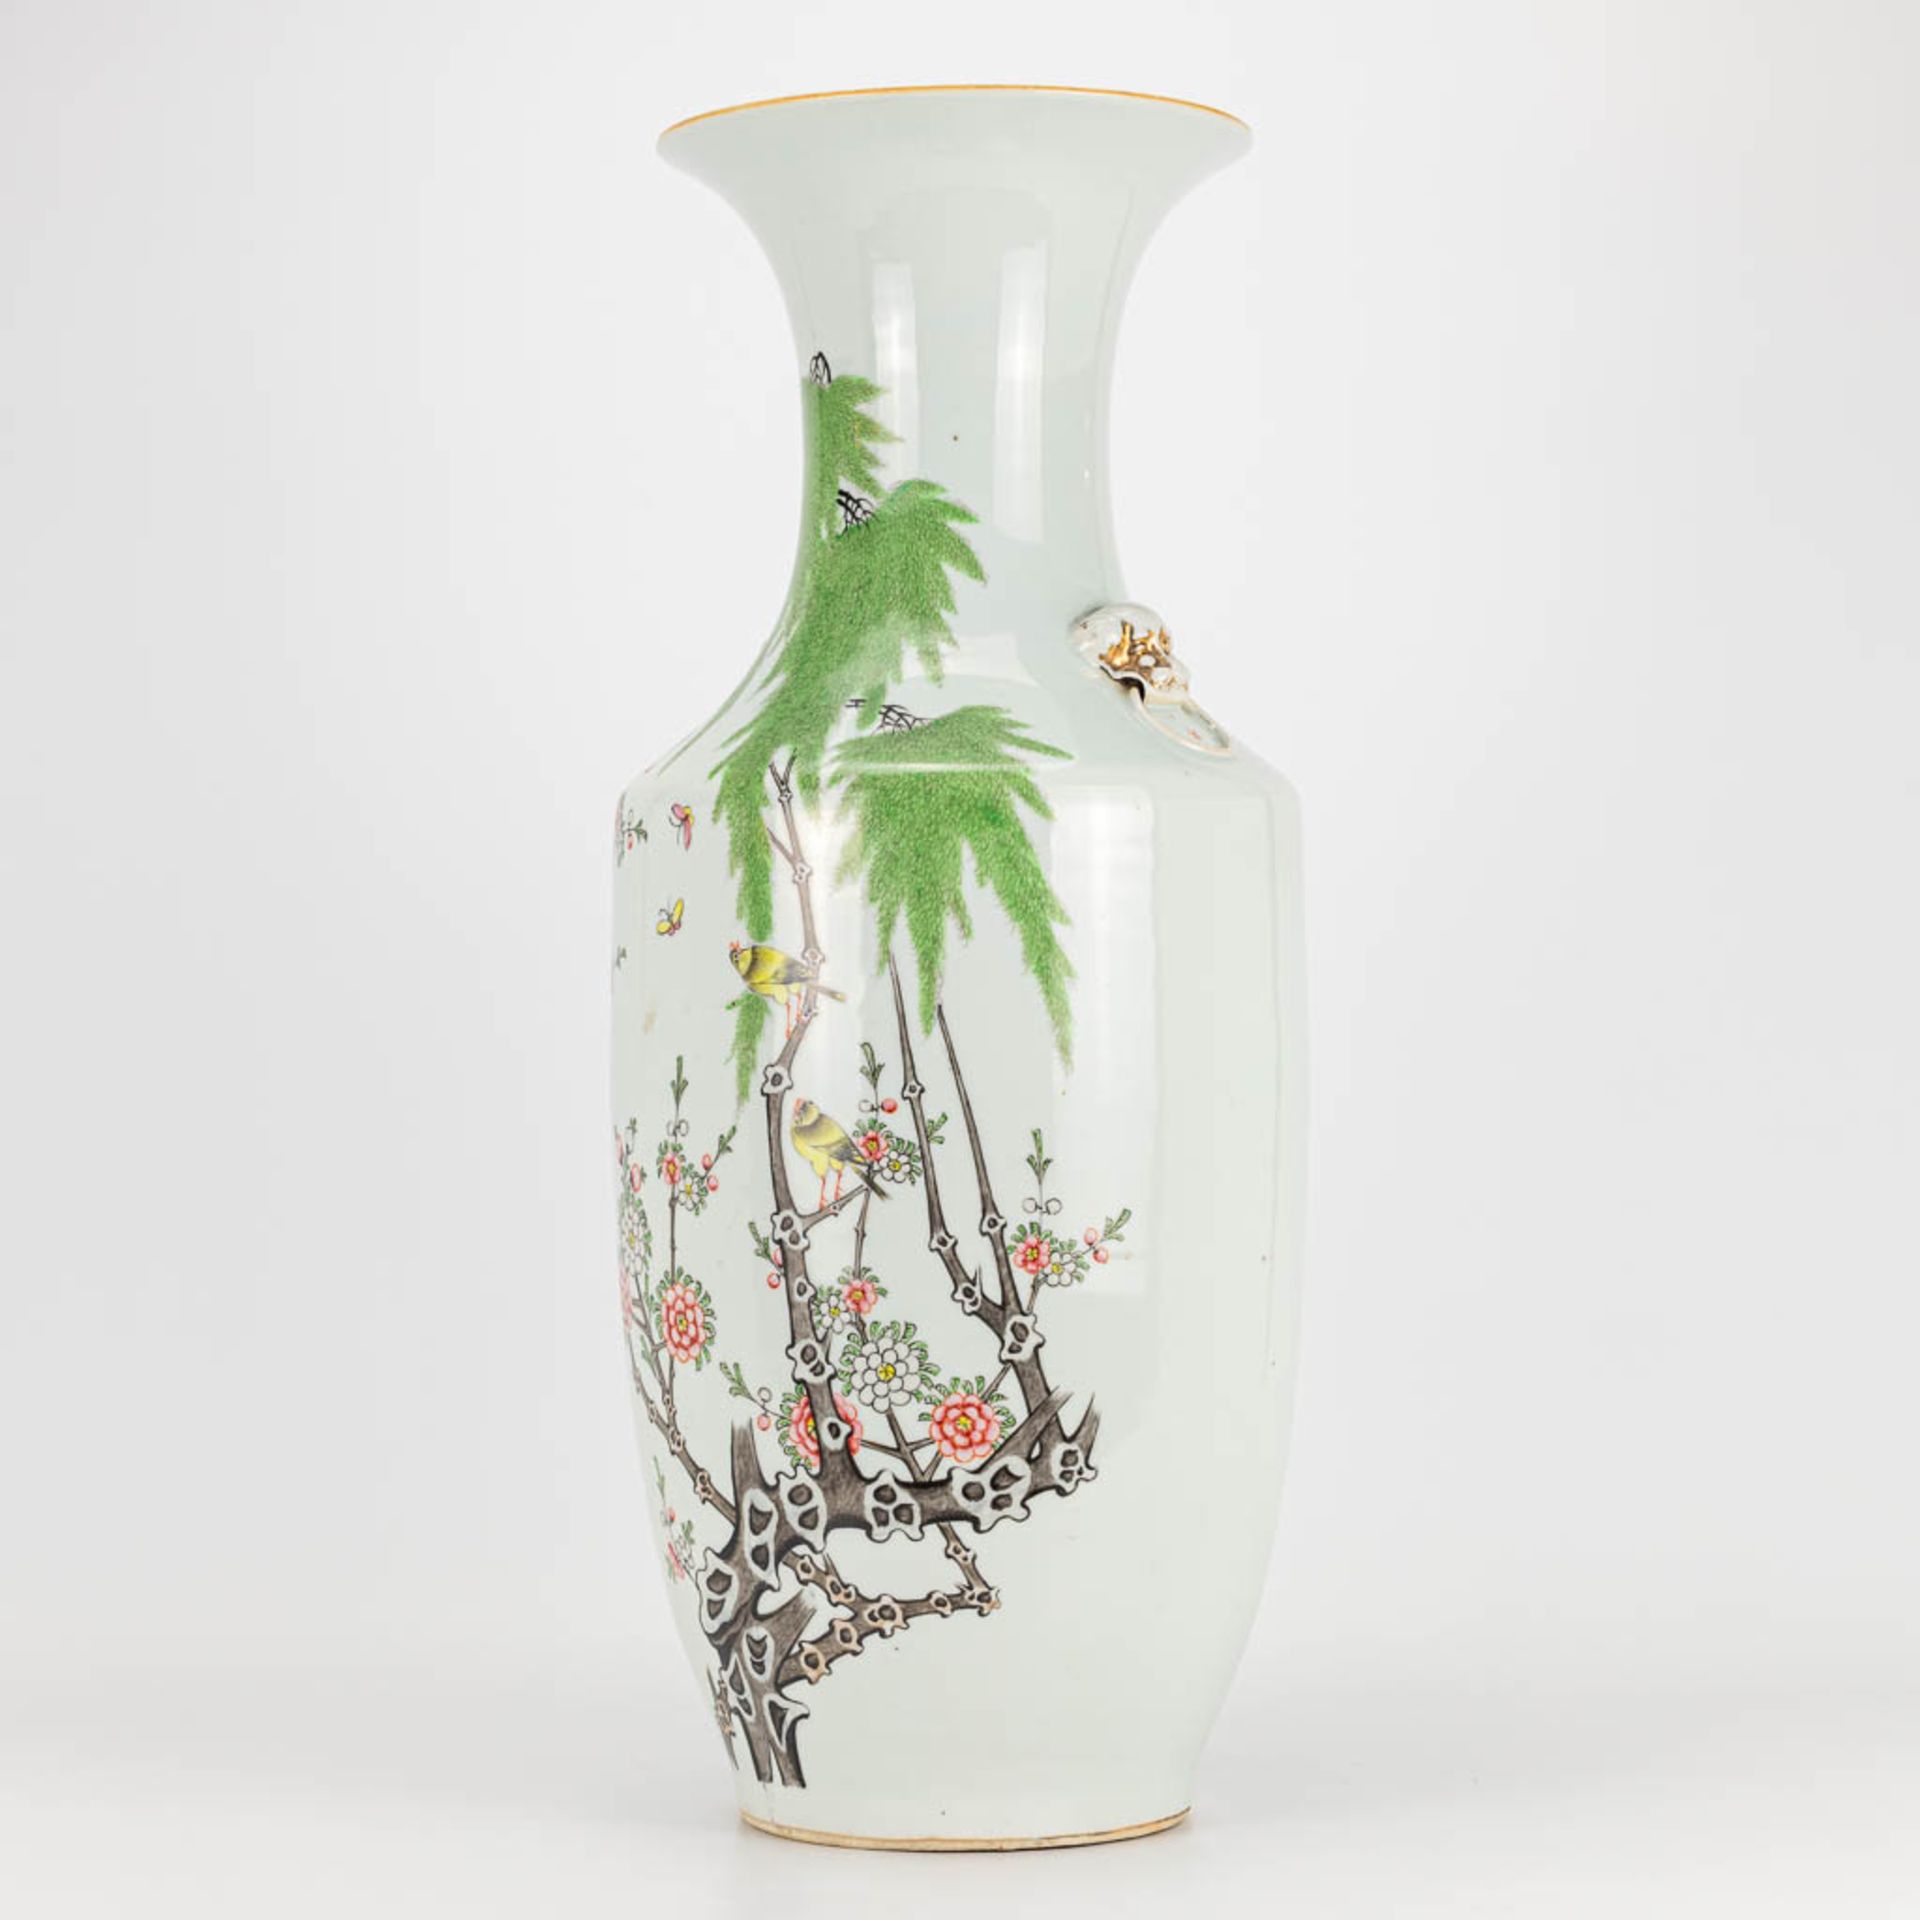 A vase made of Chinese porcelain and decorated with flowers and birds. - Image 5 of 16